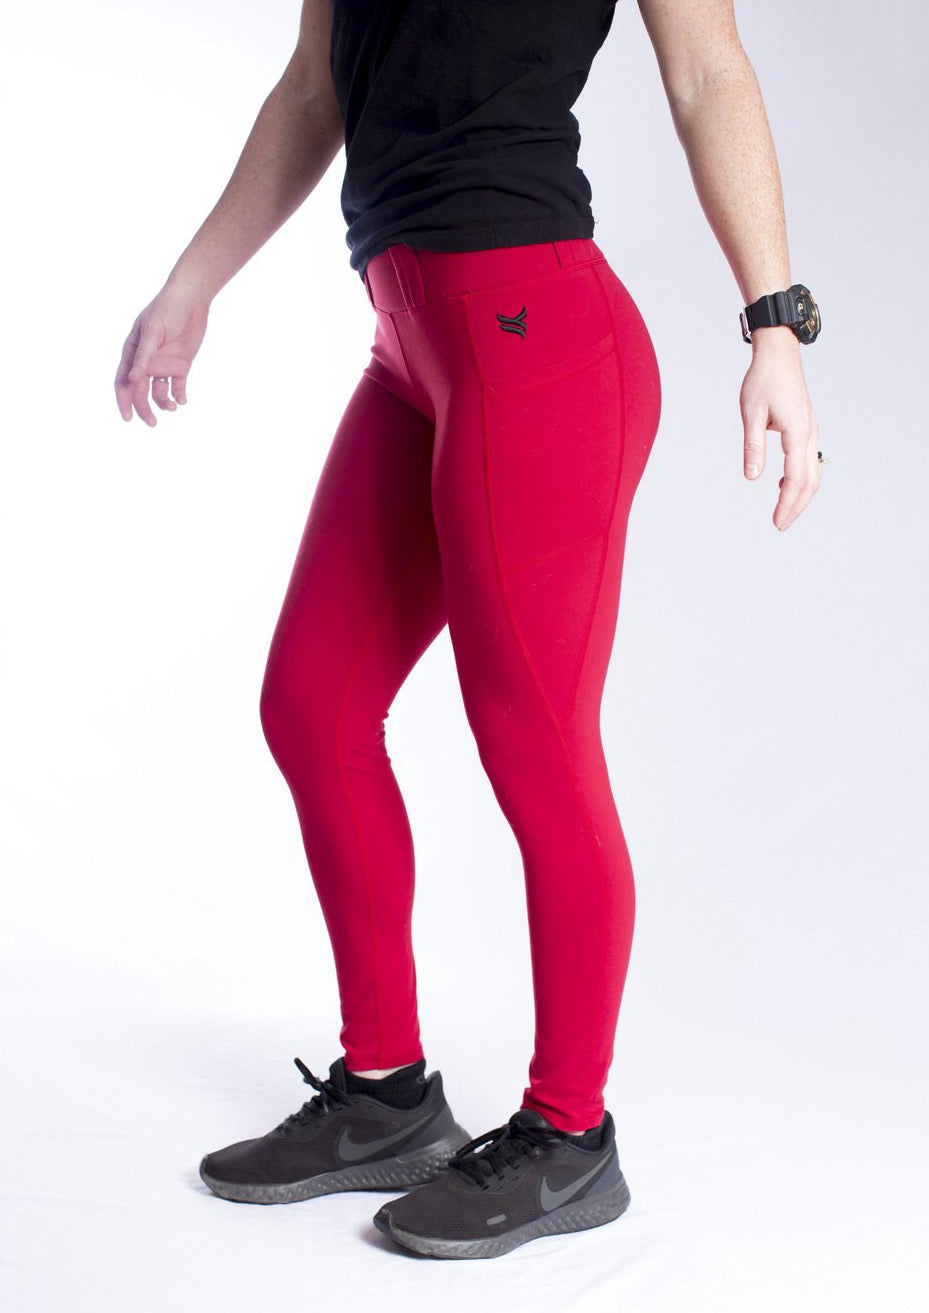 Rounded Concealed Carry Leggings Red CEX-LEGNS-BG-RH-XLG - Online